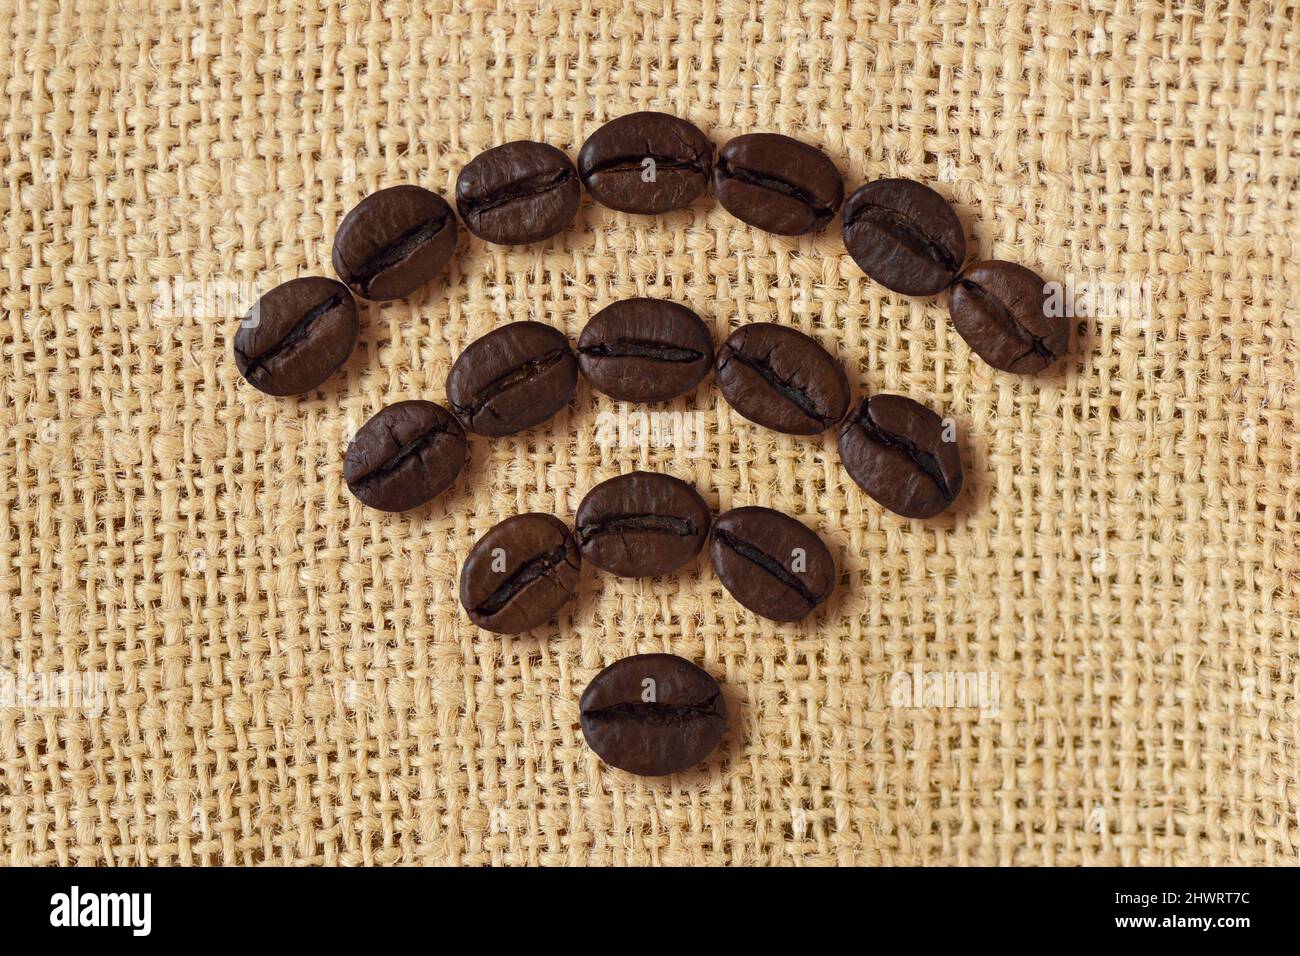 Wifi connection symbol made of coffee beans Stock Photo